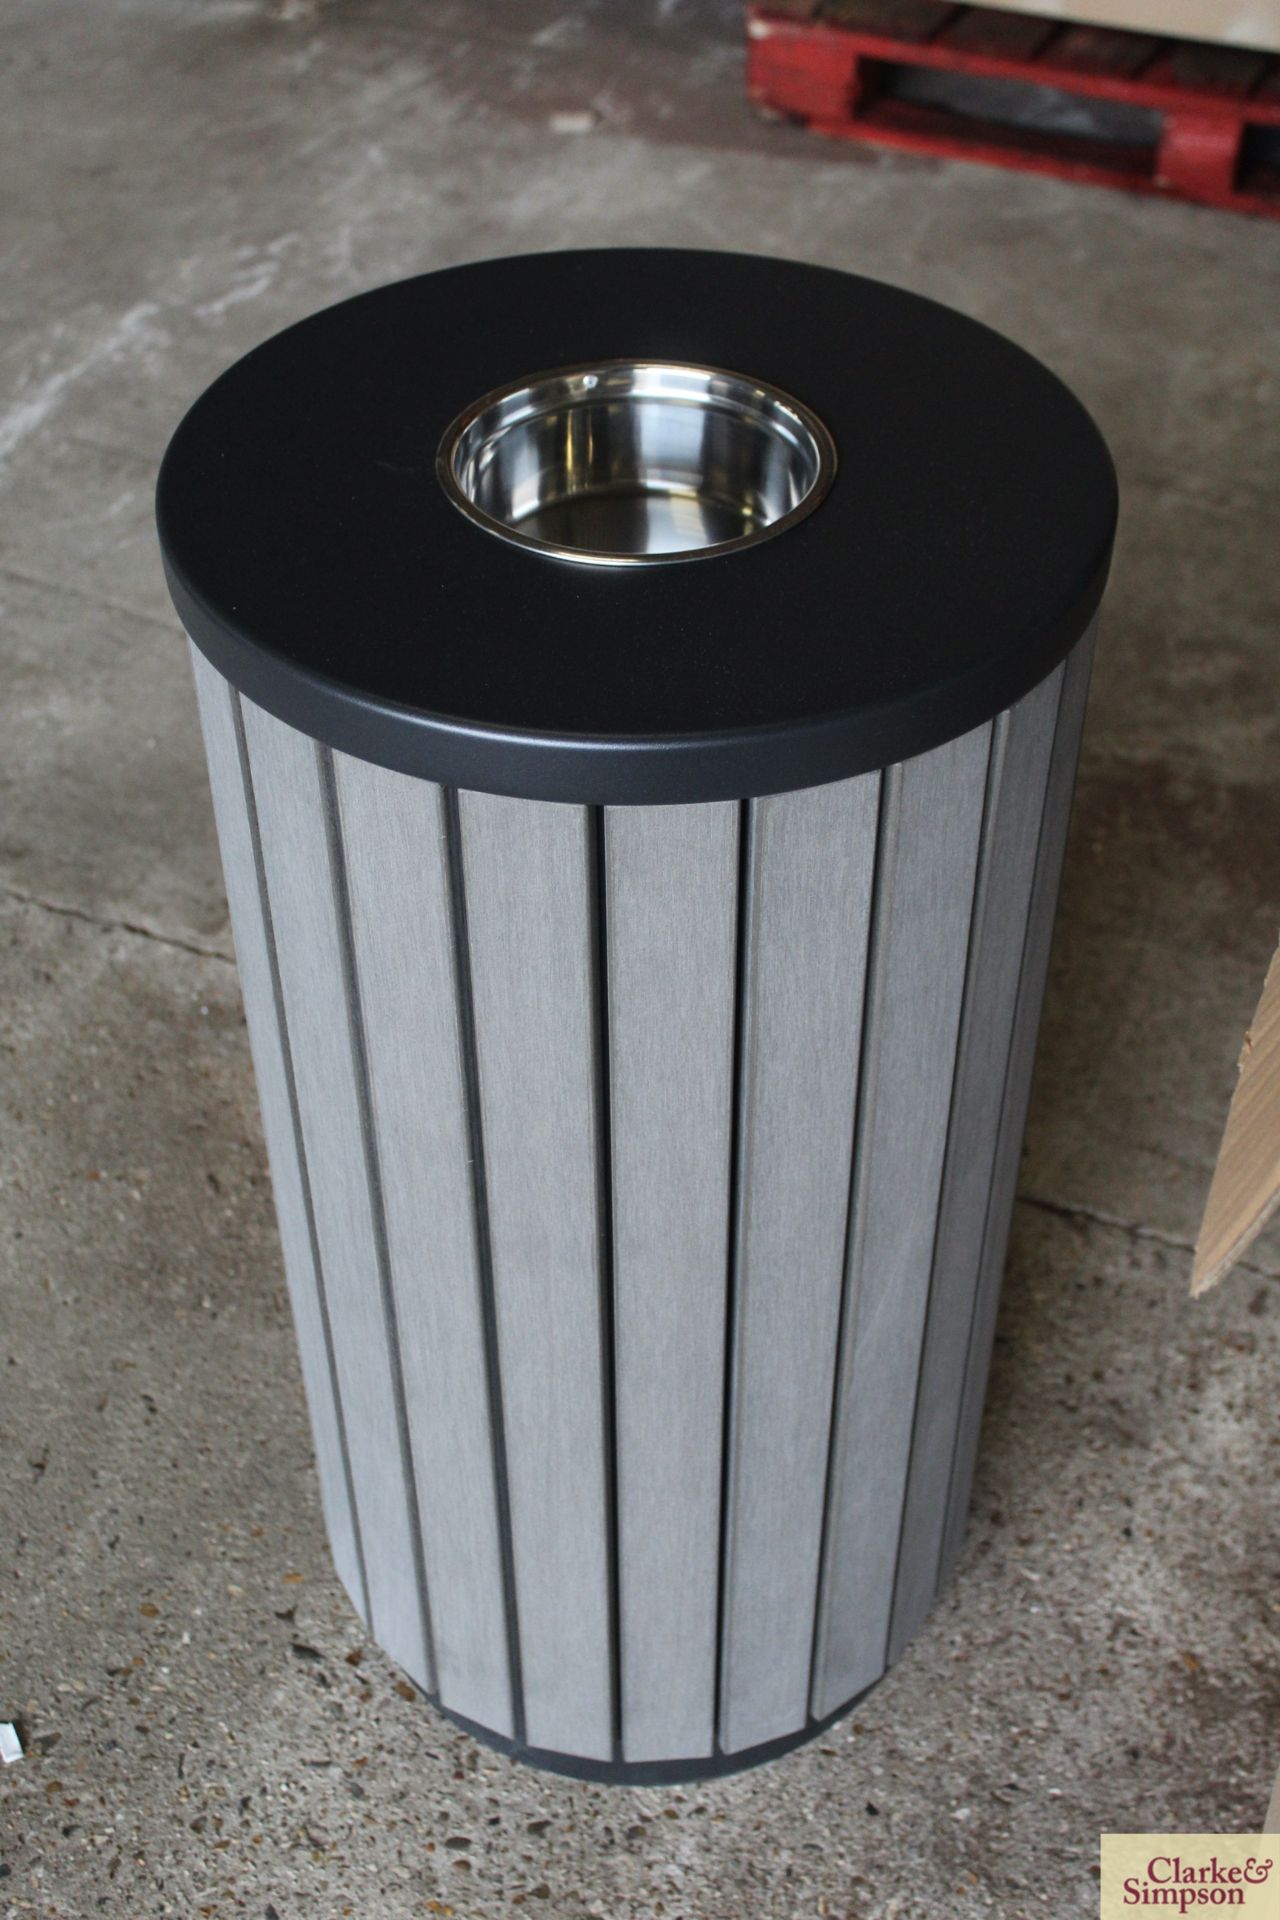 4x boxed outdoor waste bins with ash trays. - Image 3 of 3